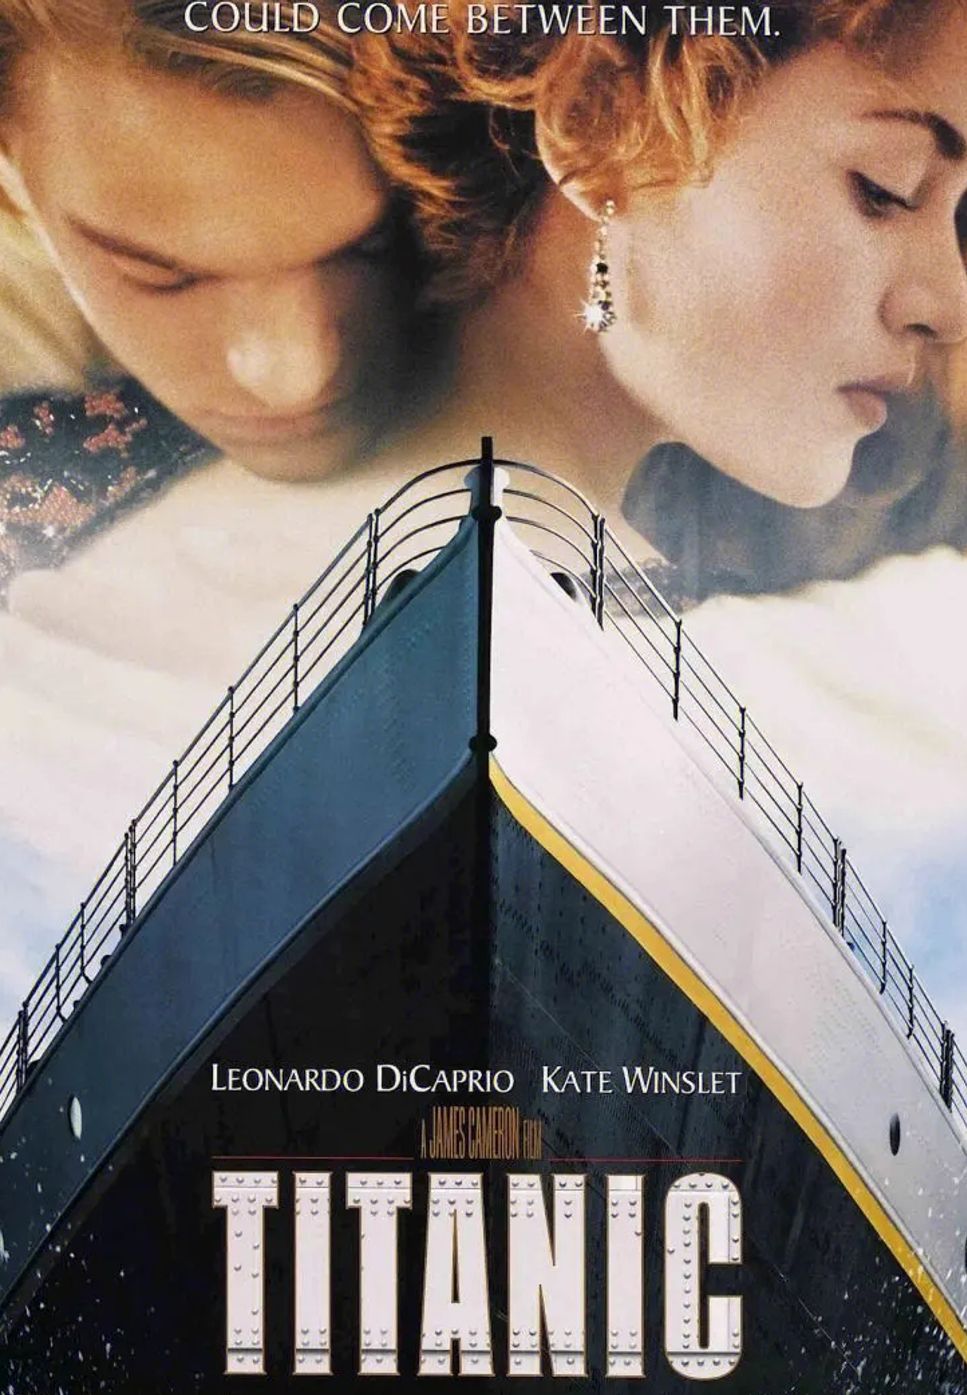 James Horner - The Portrait ("Titanic" Theme - For Piano Solo) by poon